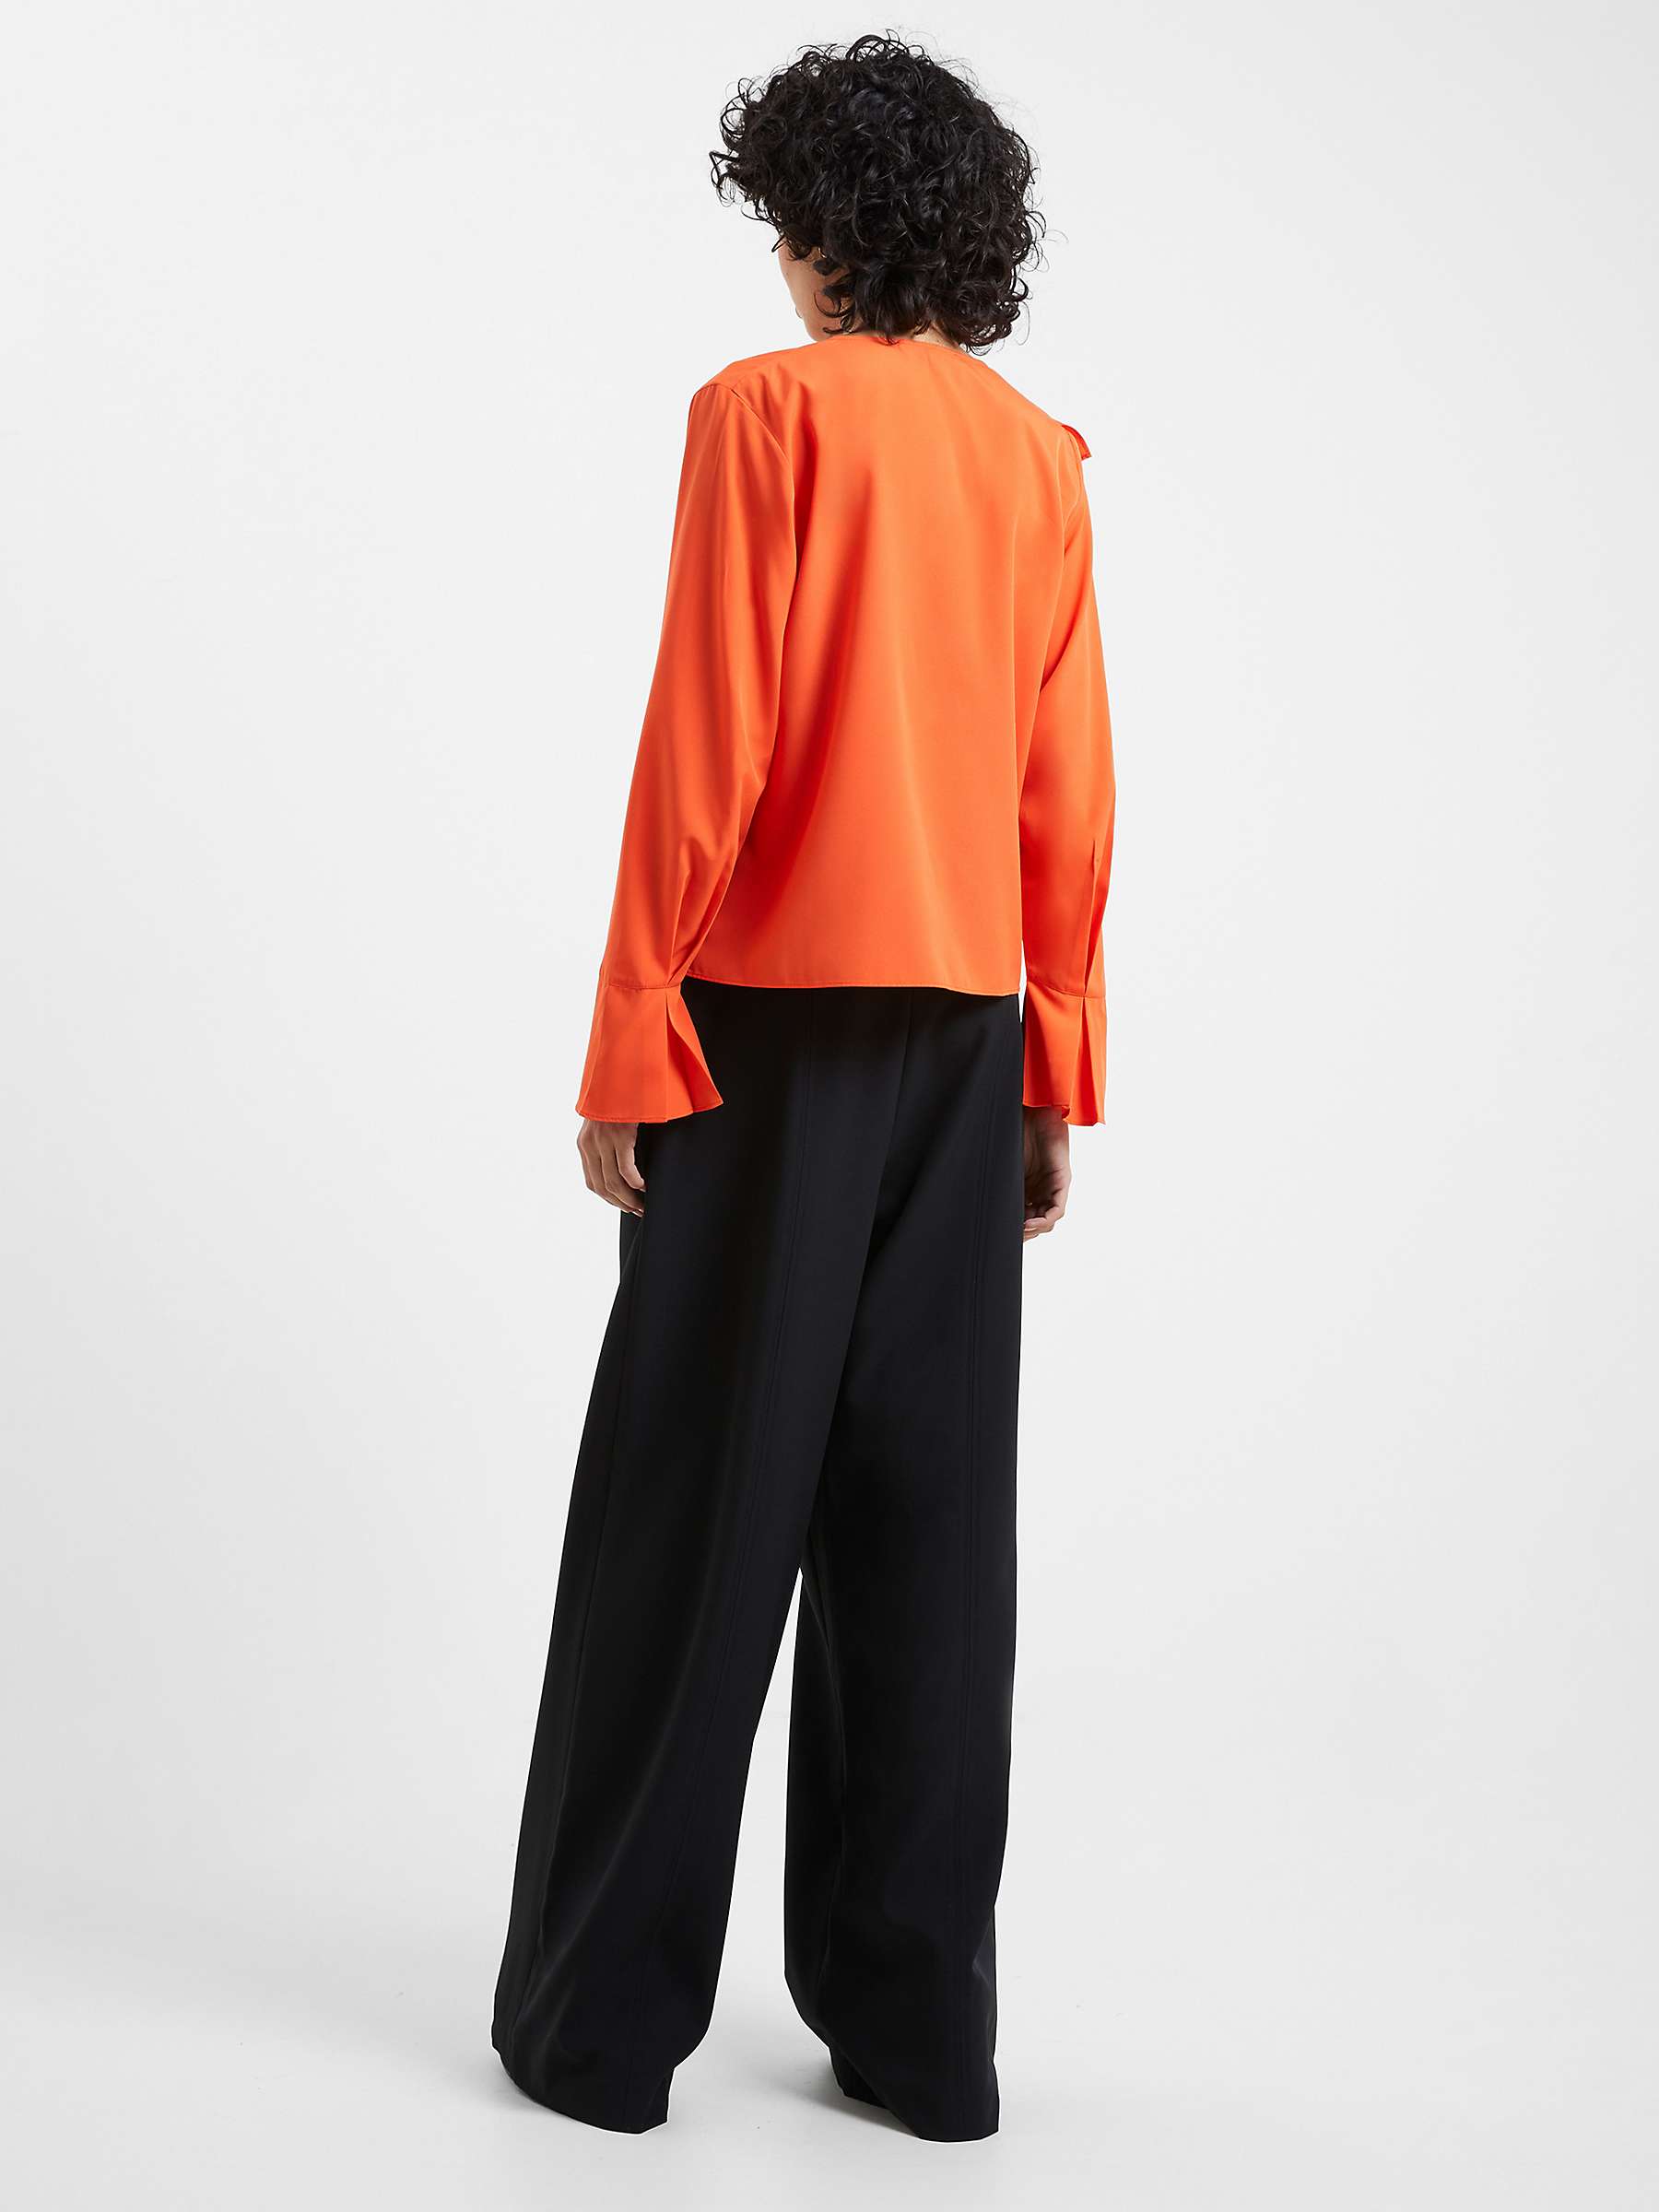 Buy French Connection Crepe Shirt Online at johnlewis.com